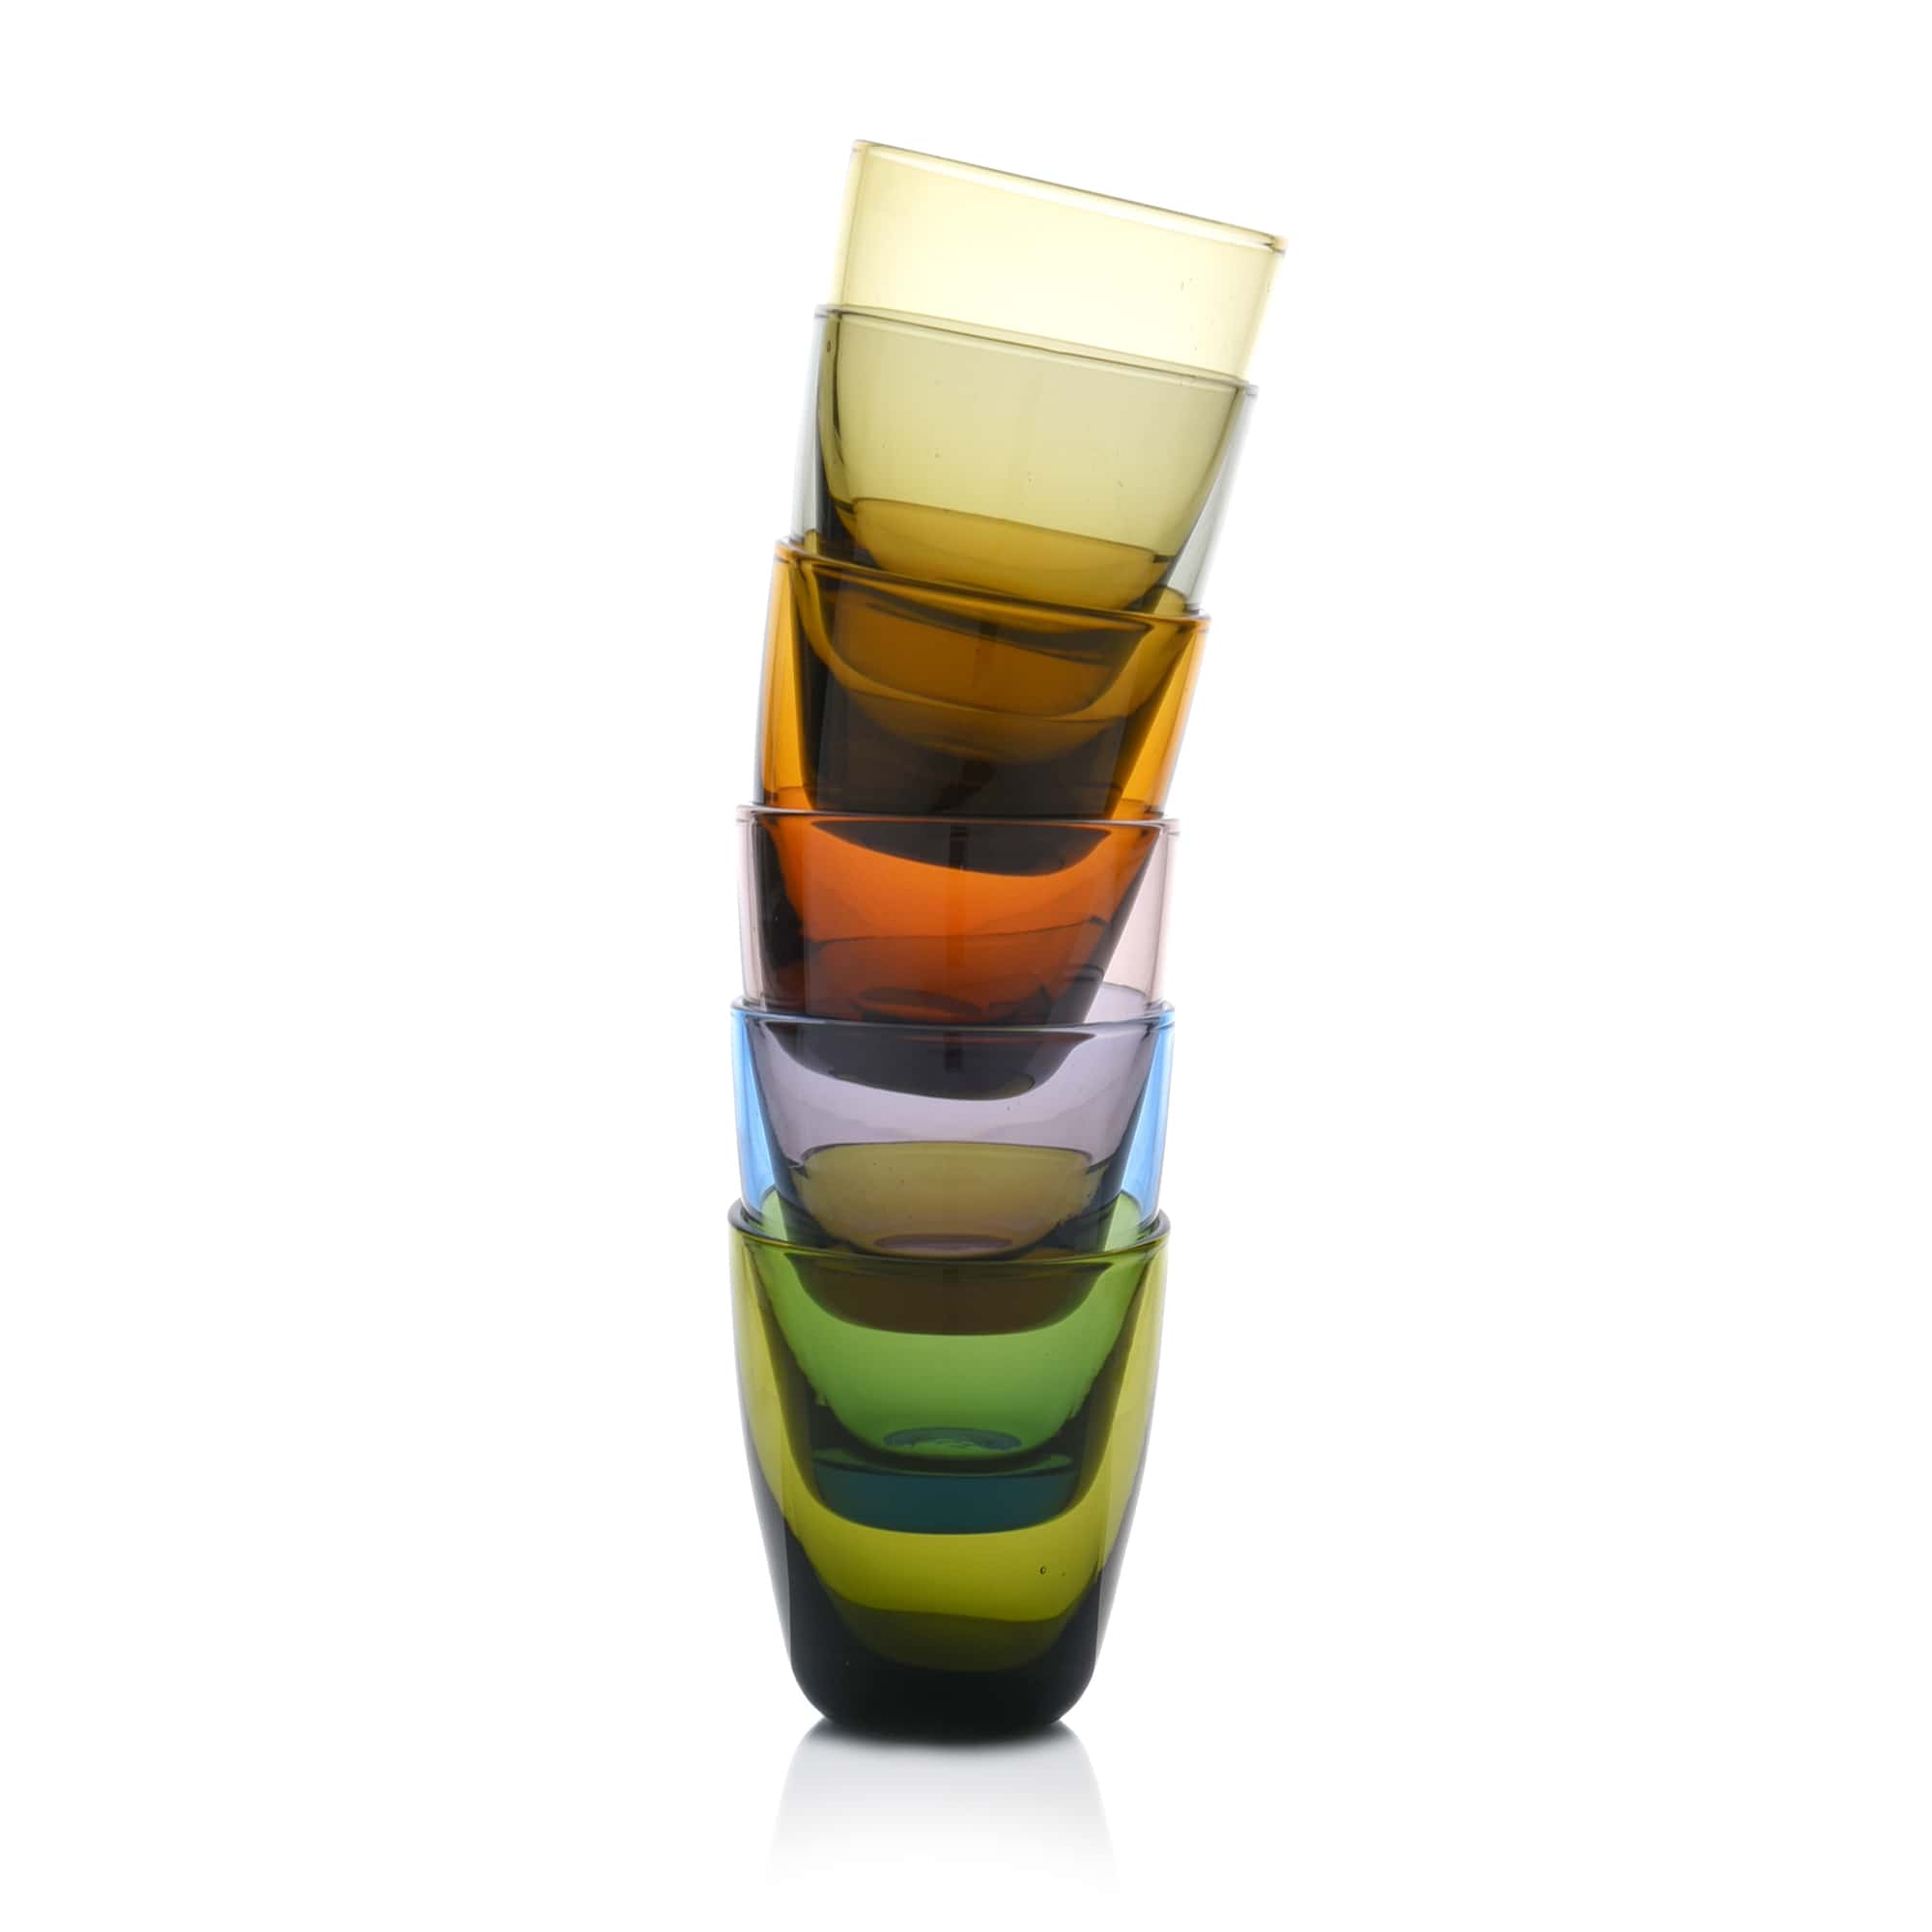 Set of Six Colorful Shot Glasses with Tray